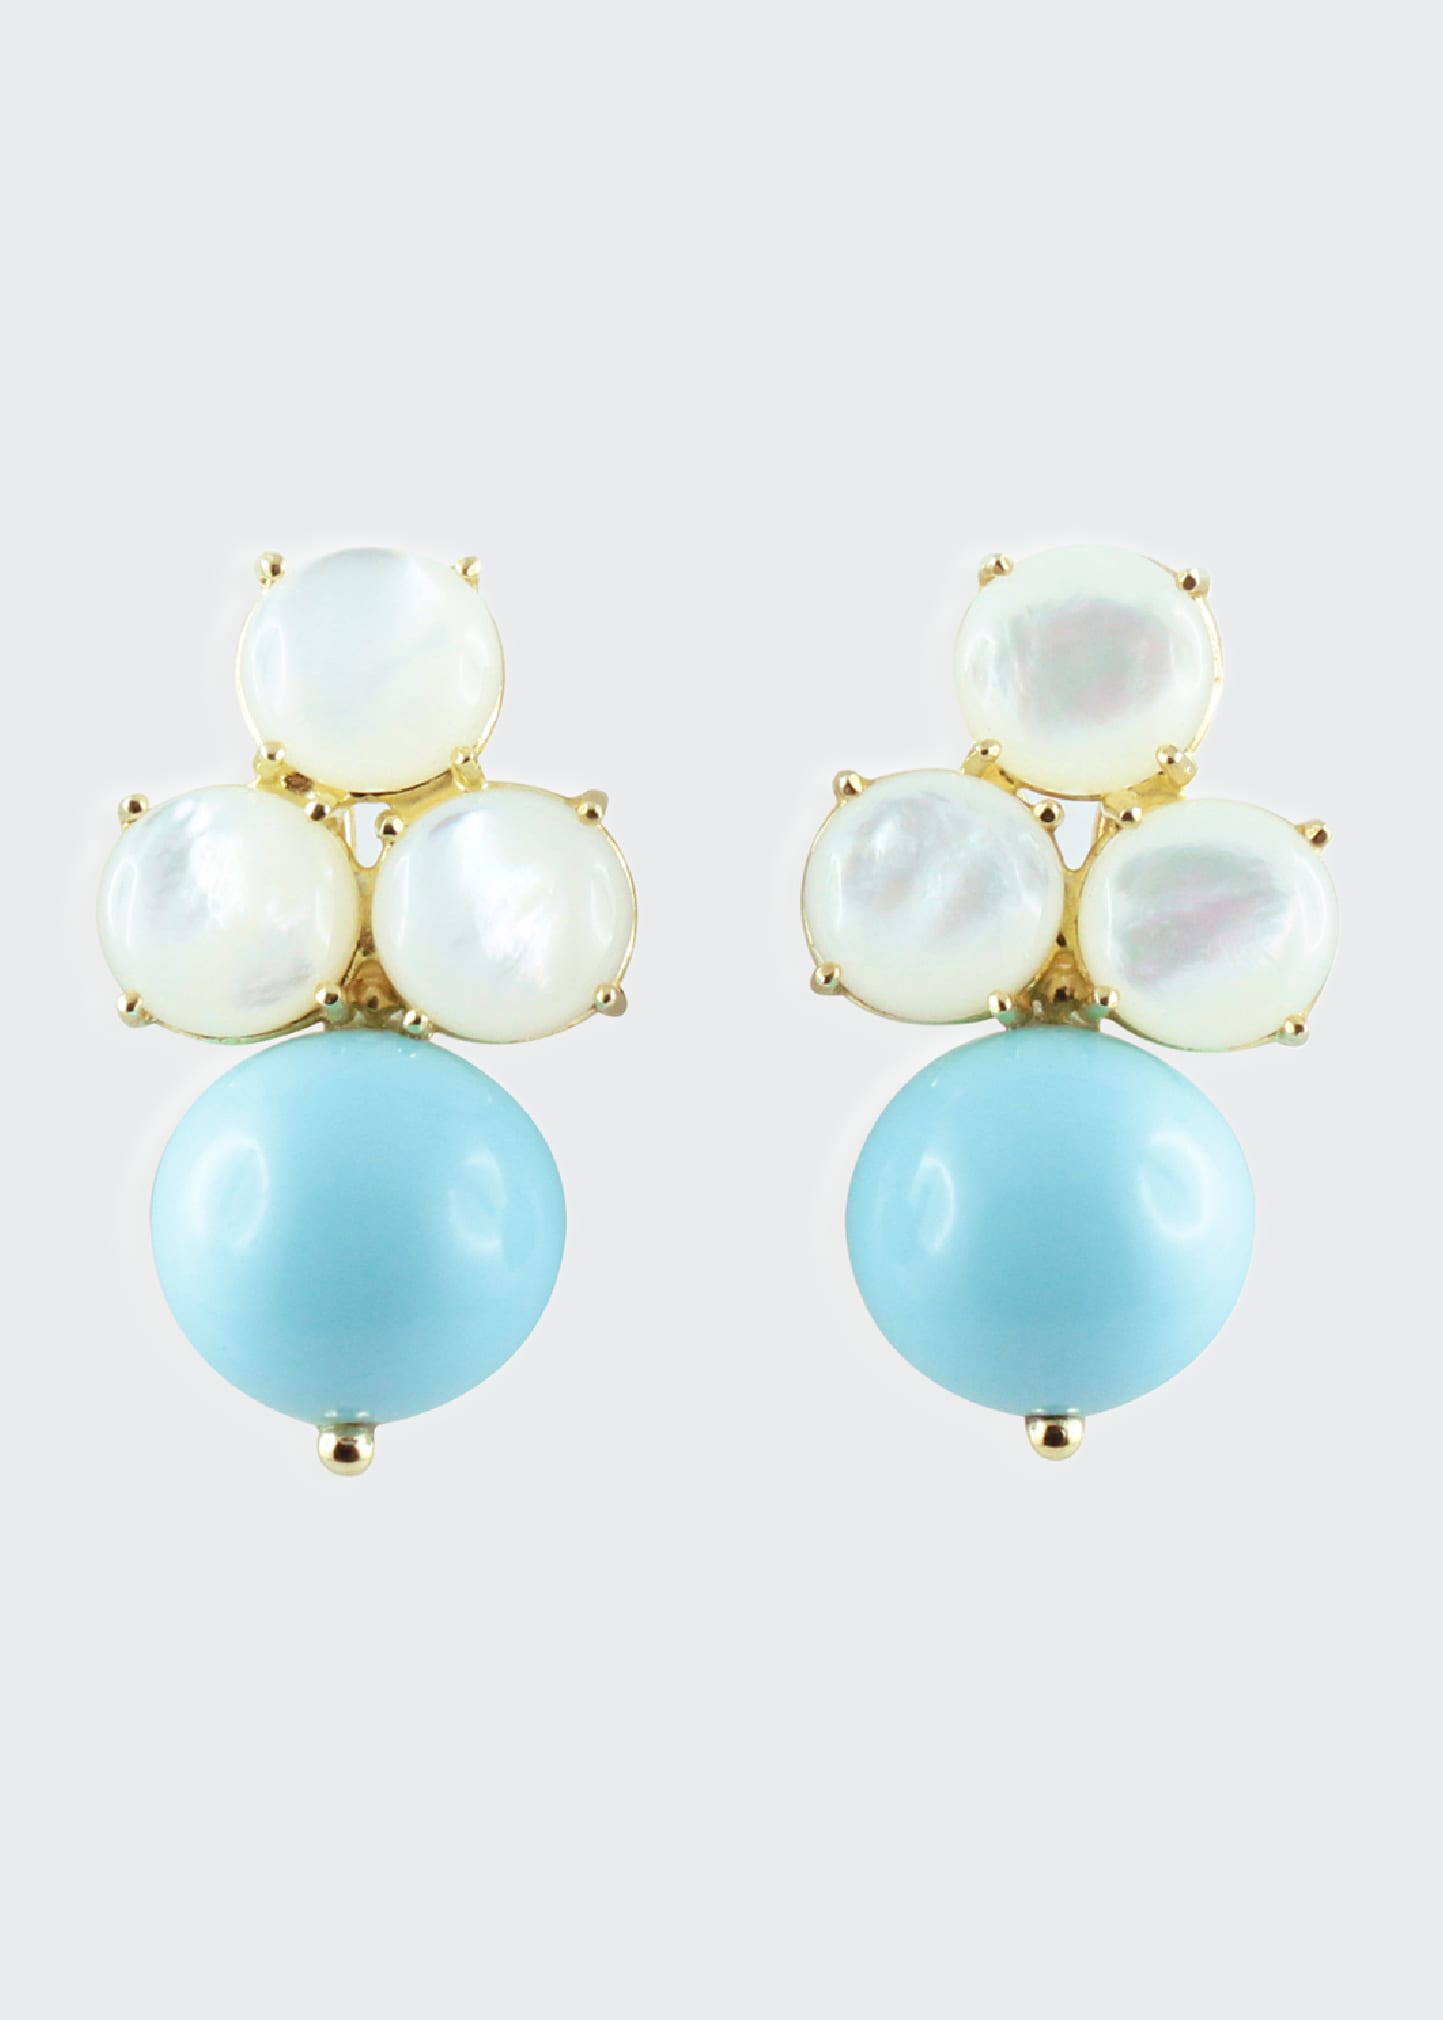 Grazia And Marica Vozza Tris Boule Mother-of-Pearl and Turquoise Resin Earrings